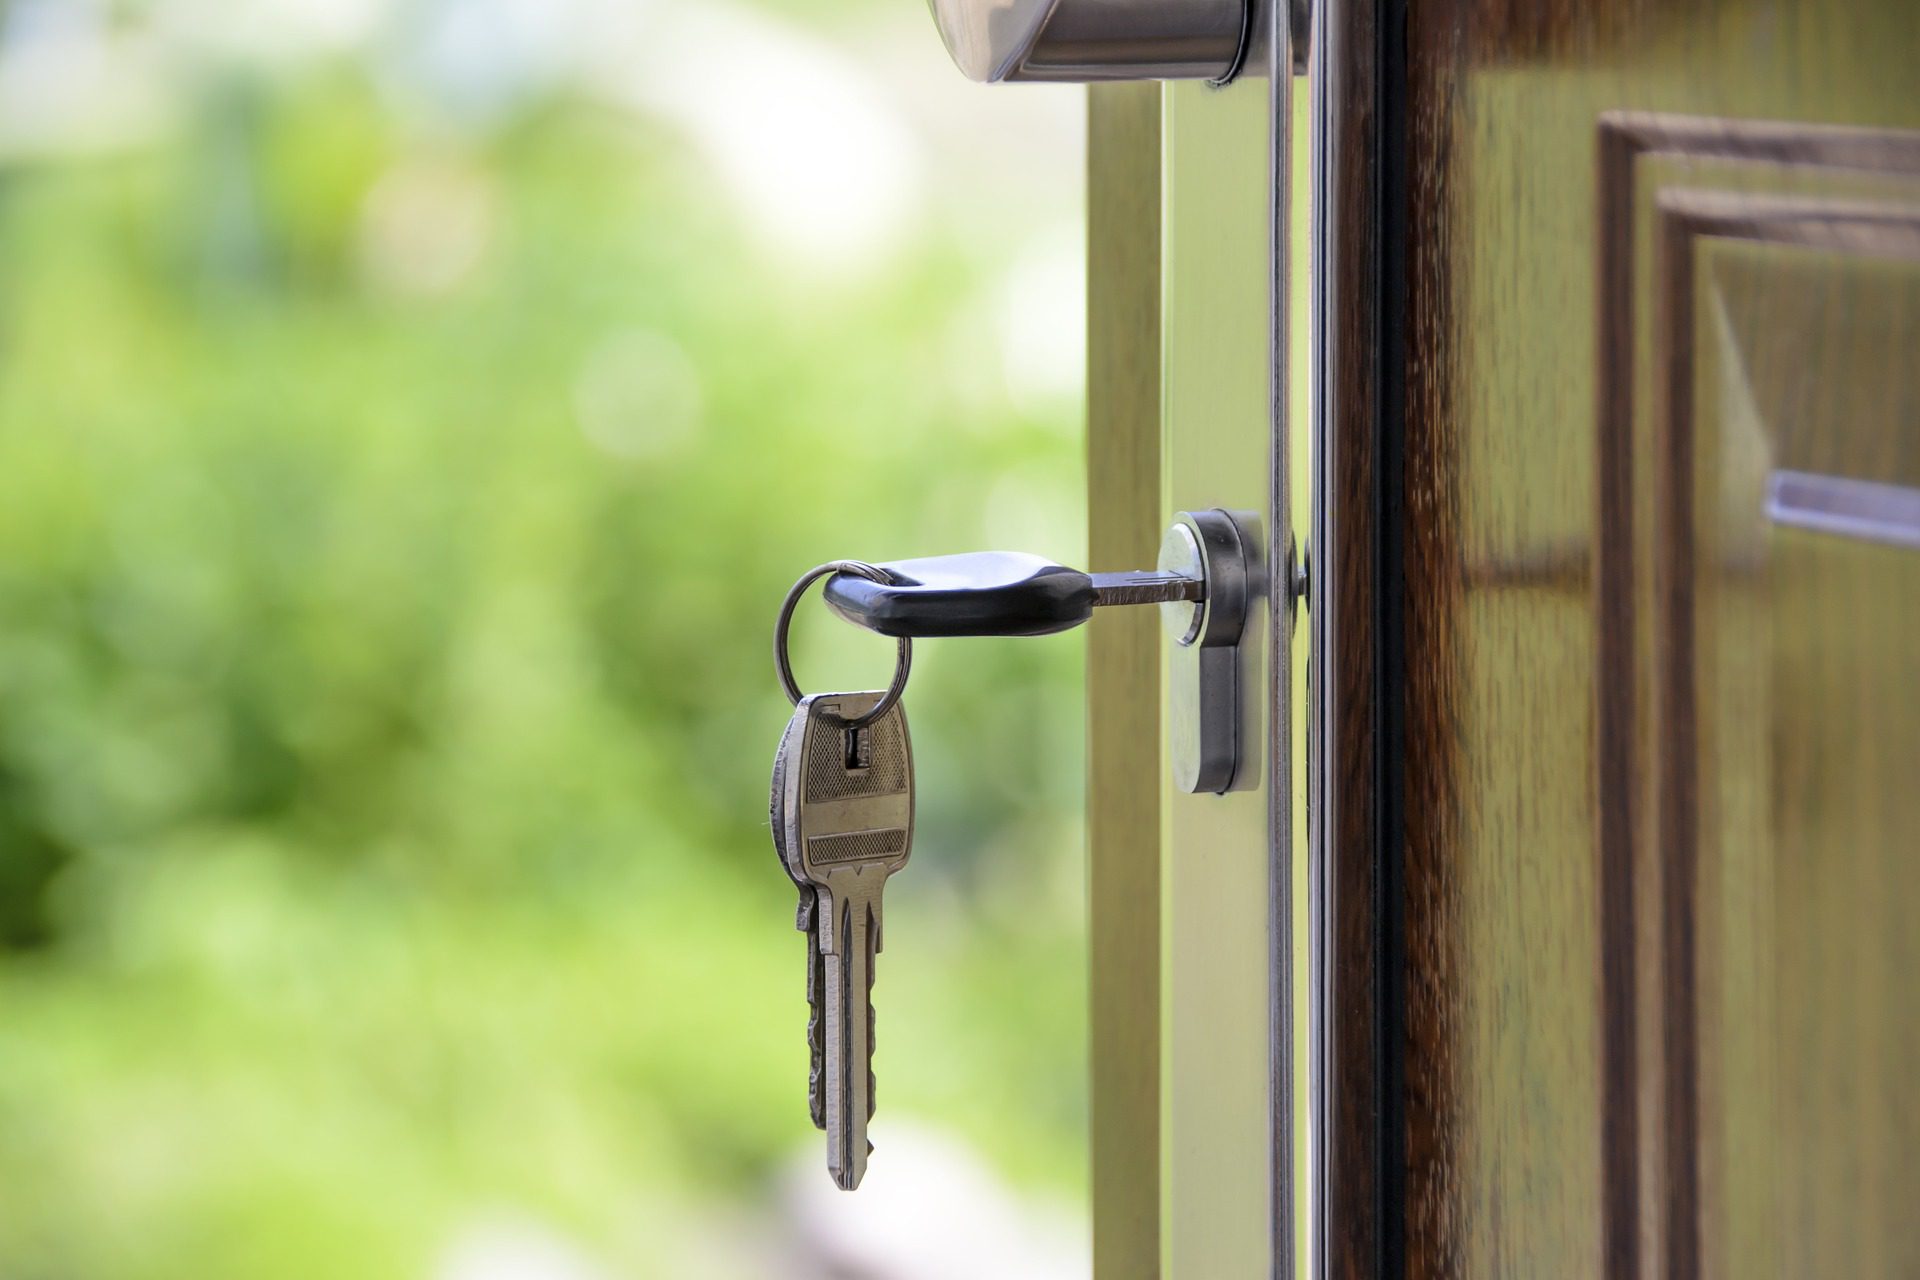 Do you rent out a property in Wales? Read this...